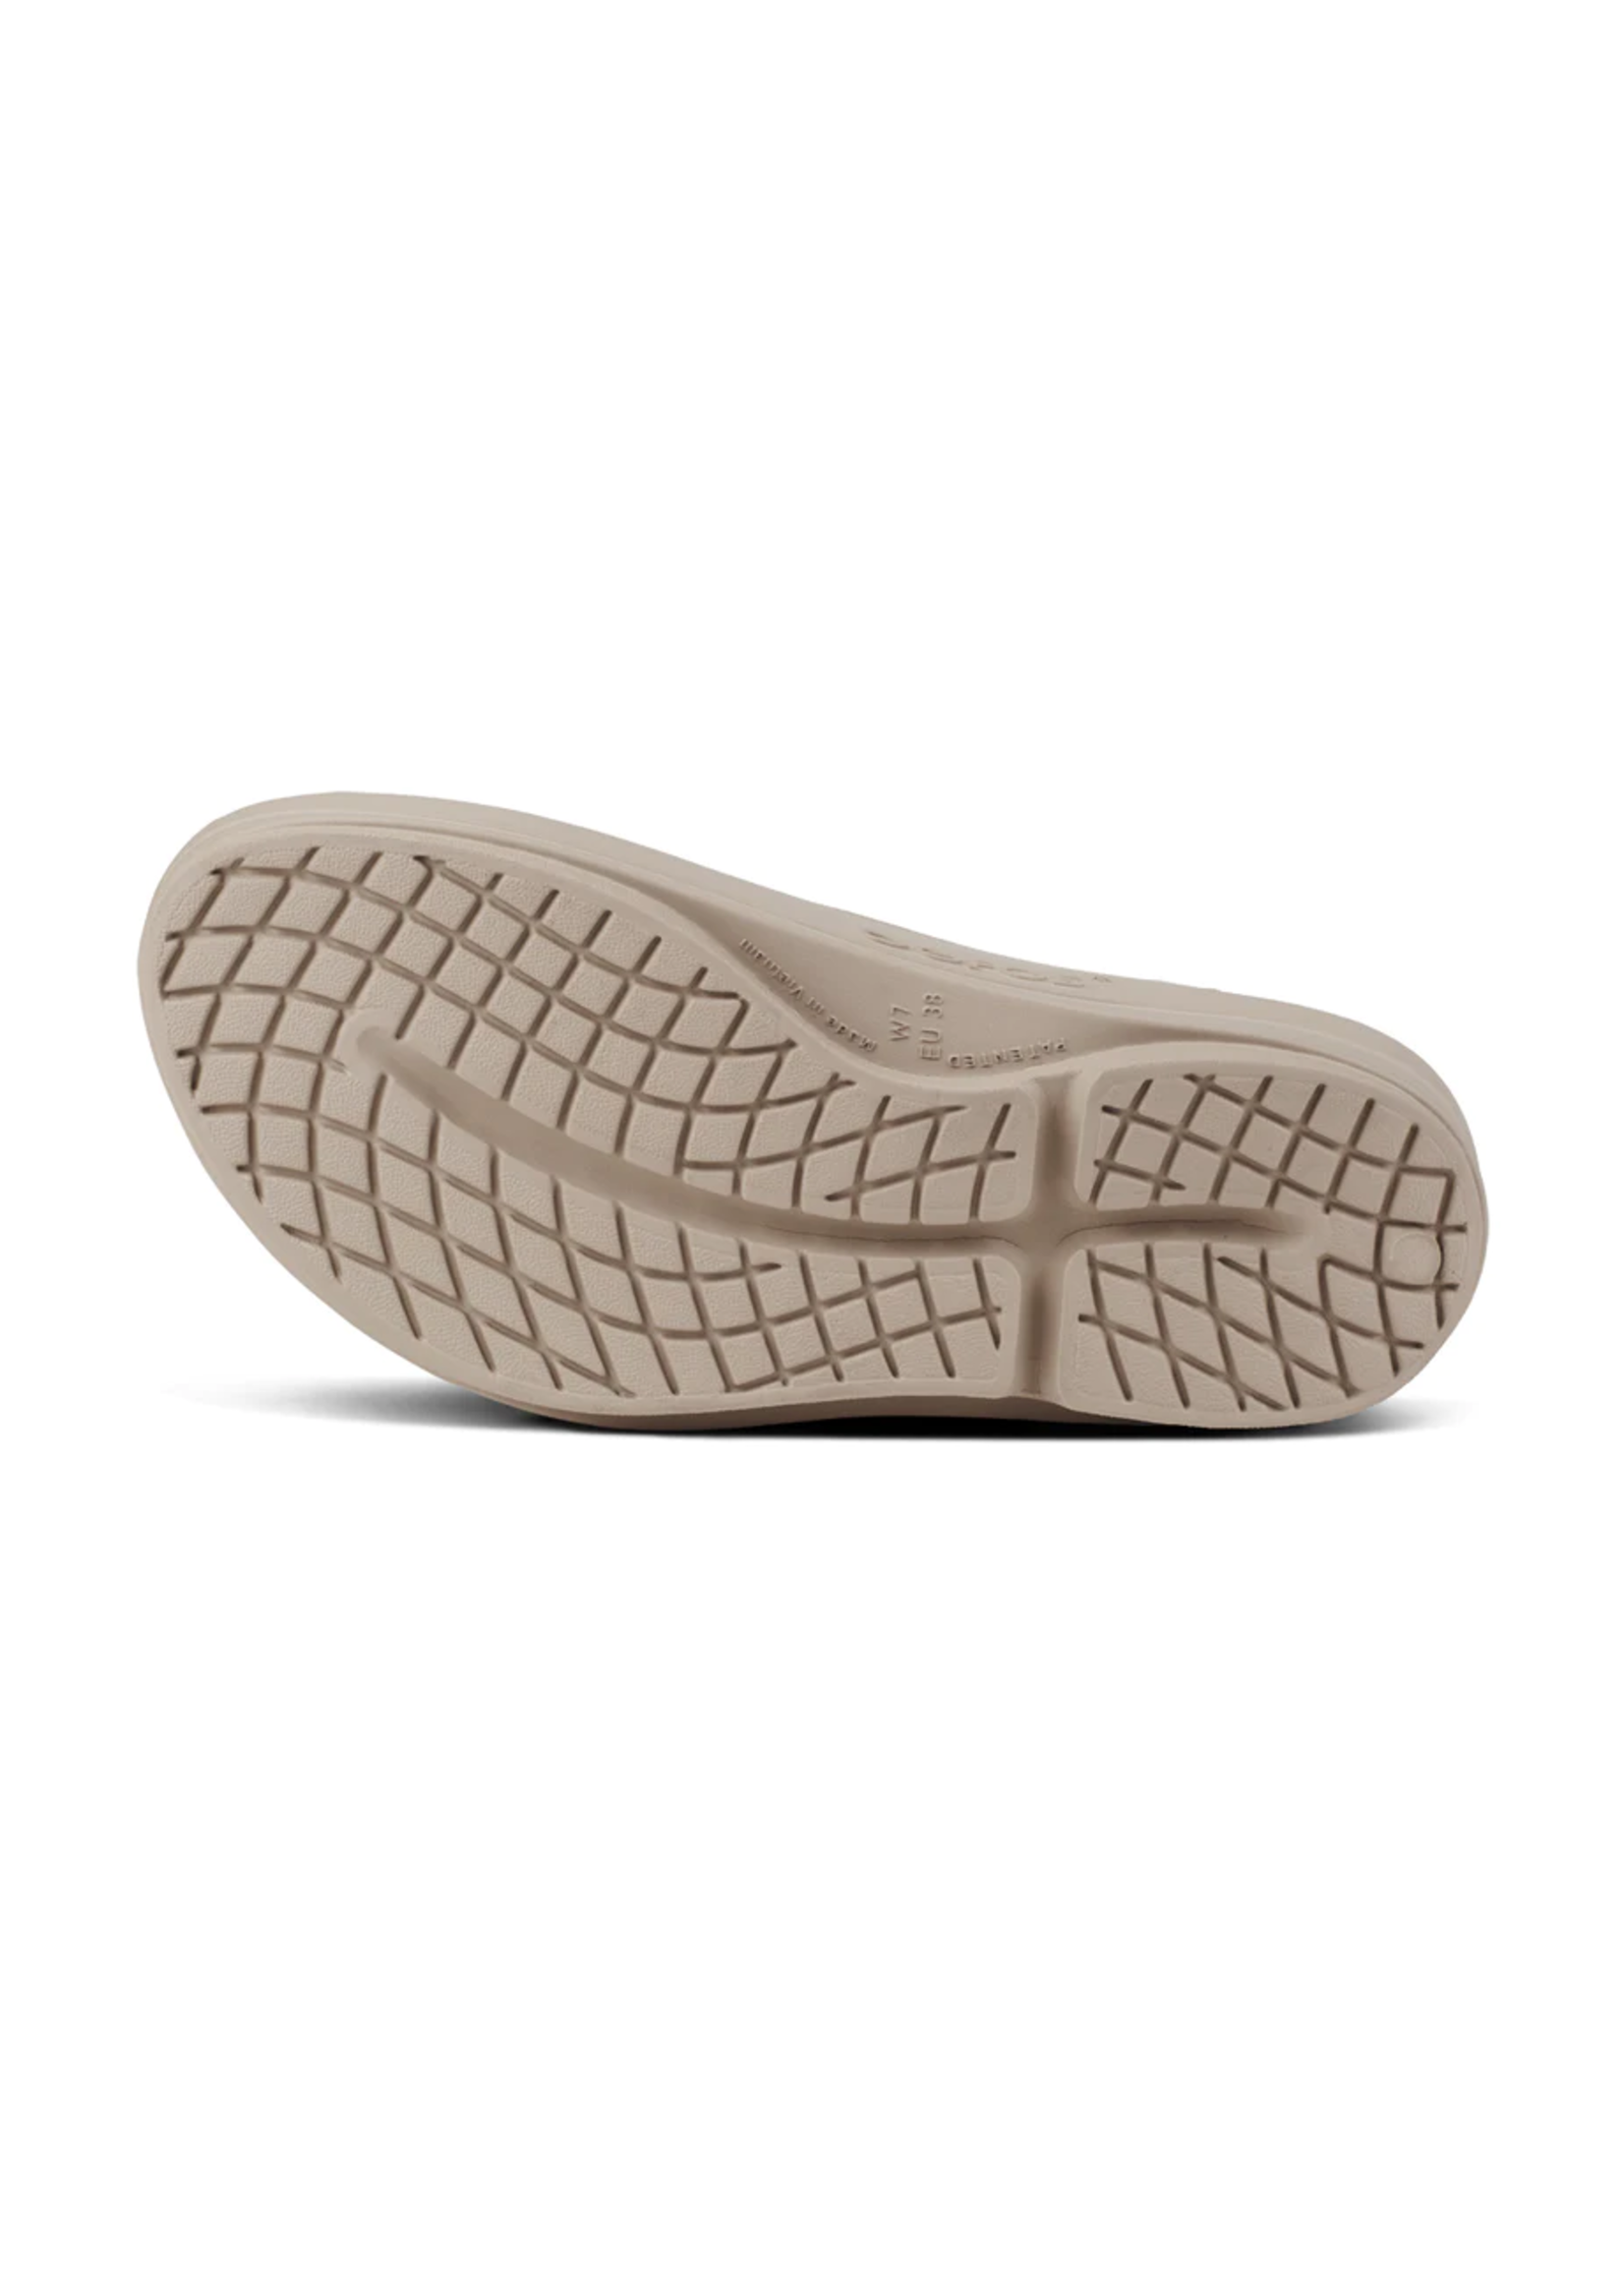 OOFOS 1410 OOMEGA OOFOAM RECOVERY DOUBLE SOLE FLIP FLOP